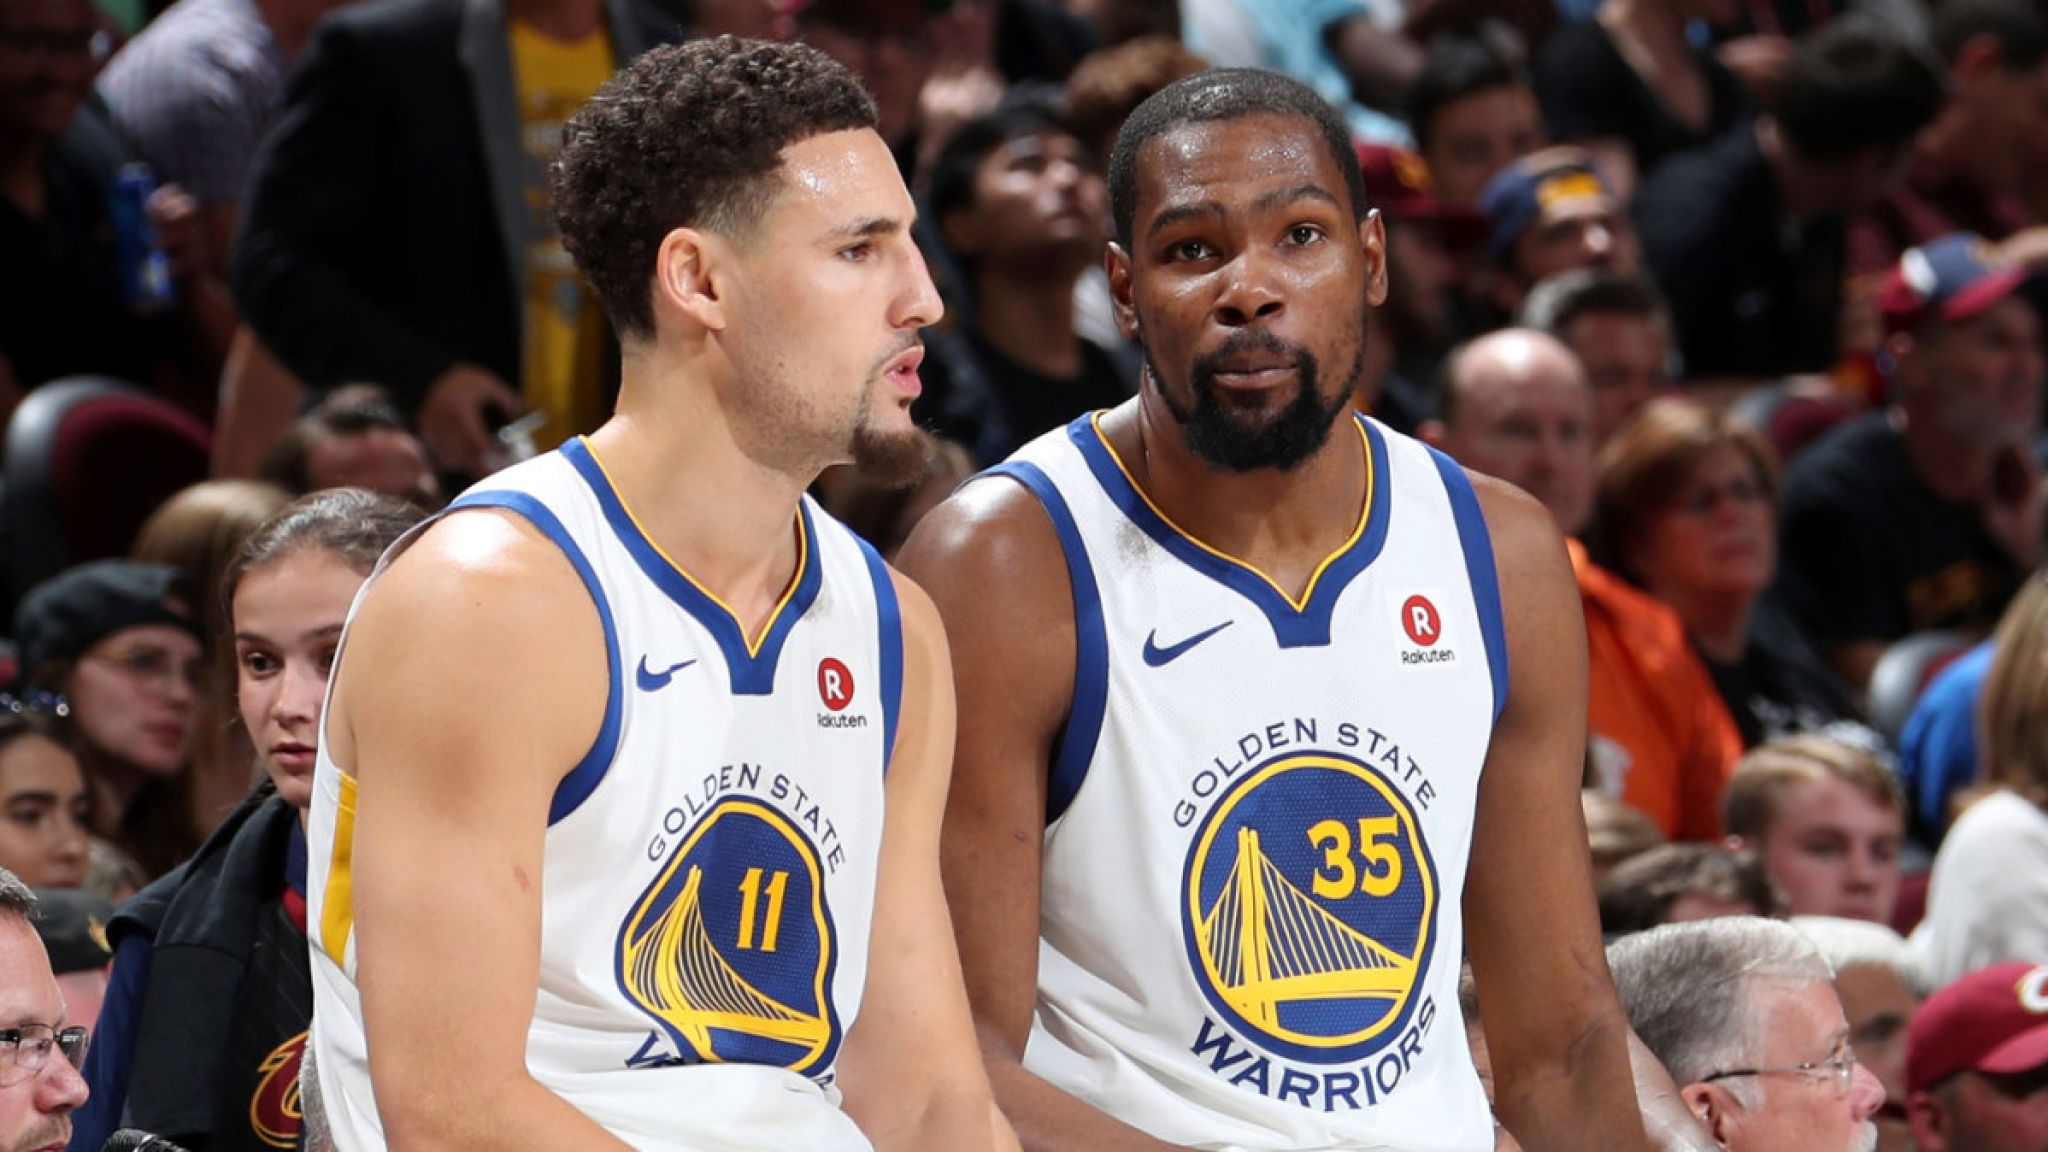 NBA news: Kevin Durant, Klay Thompson Will Leave The Warriors Hints Team Member